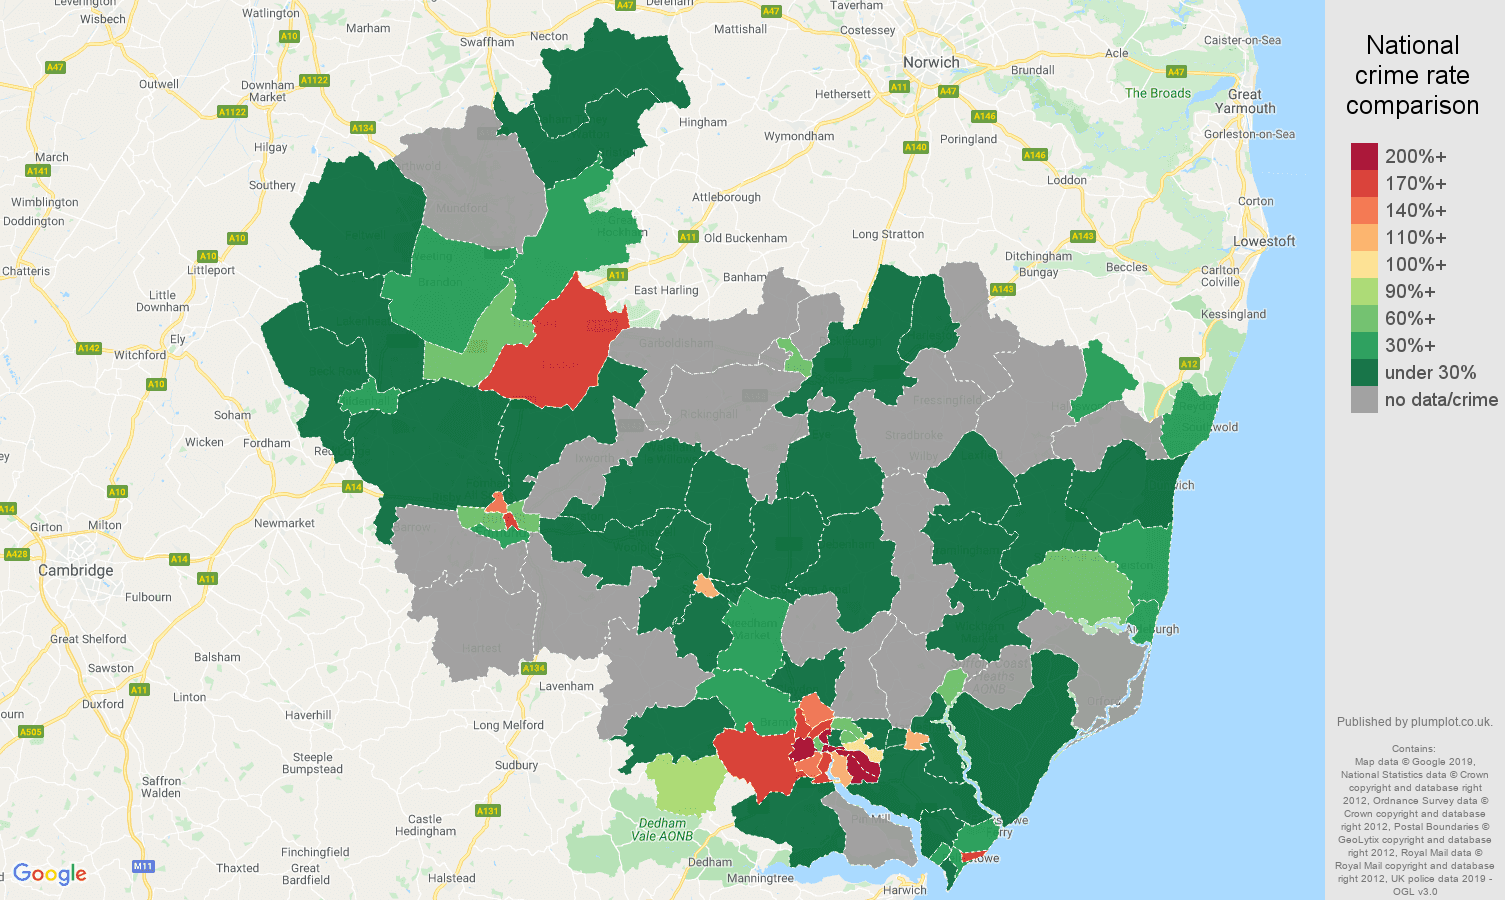 Ipswich shoplifting crime rate comparison map